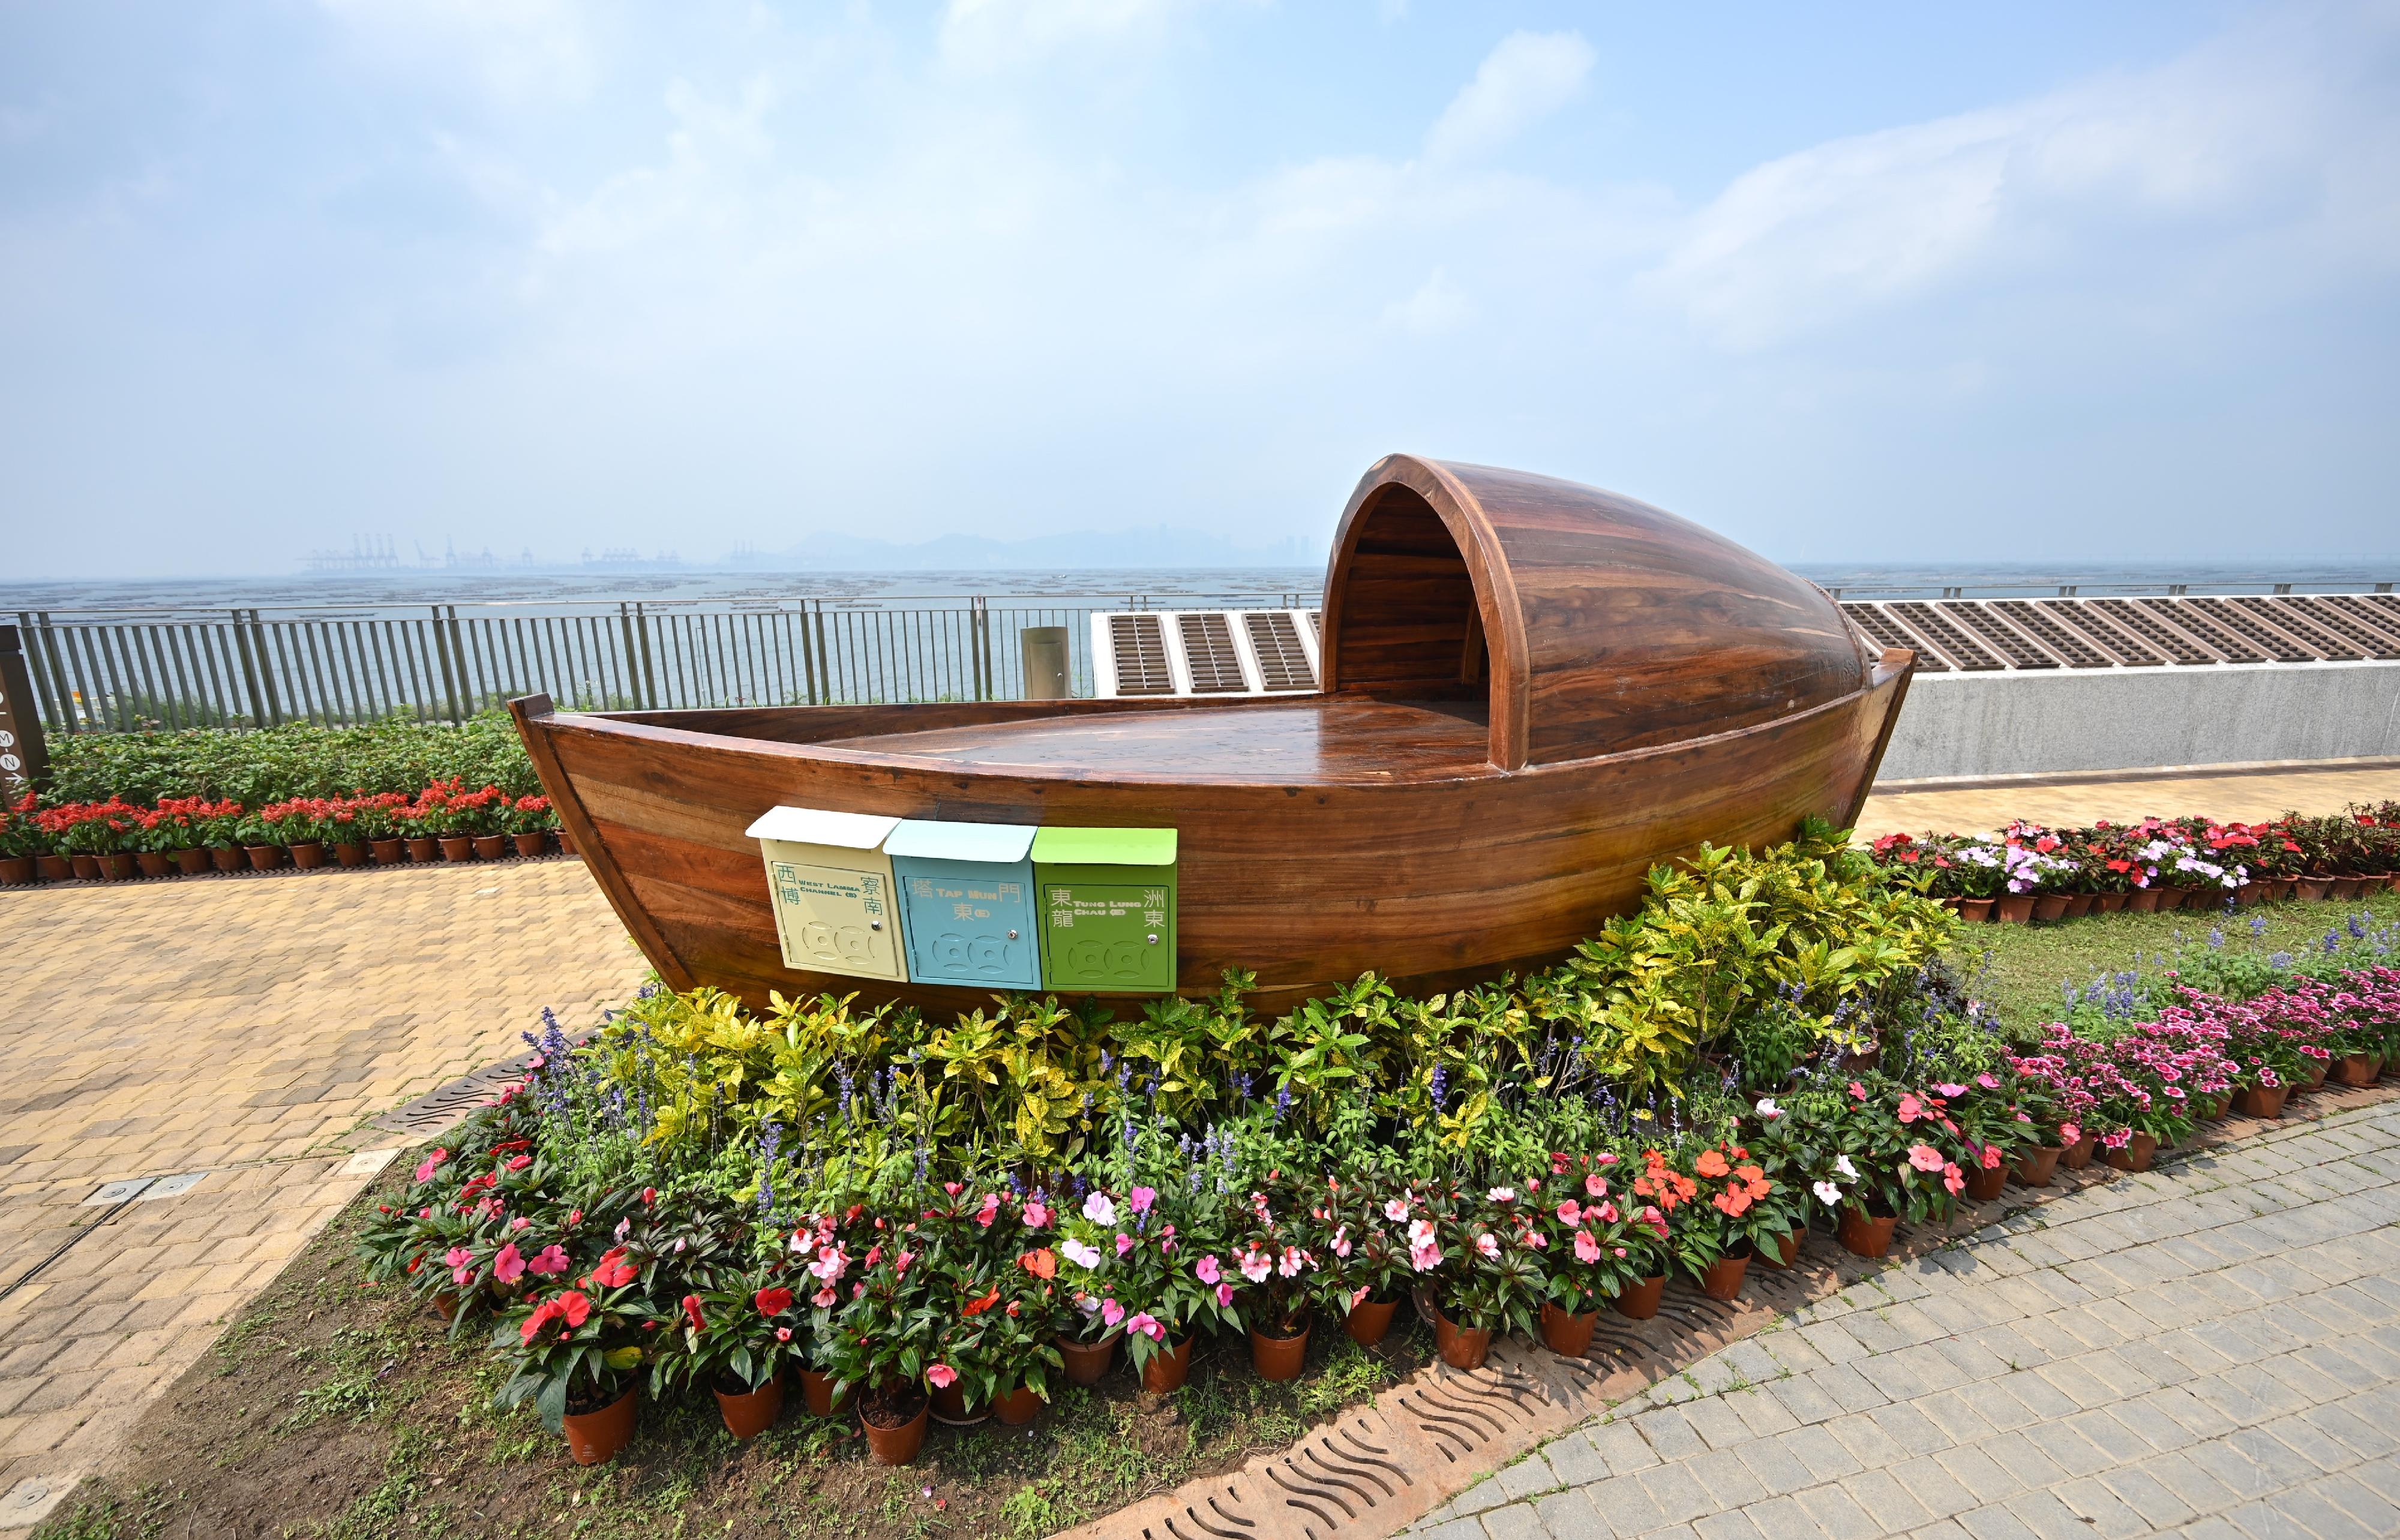 The Food and Environmental Hygiene Department said today (April 3) that to further enhance its green burial services, a wooden artwork has been installed at the Garden of Remembrance (GoR) in Tsang Tsui, Tuen Mun. Memorial post boxes with local characteristics on the artwork allow families of those who have used green burial services (including scattering of cremains at sea and in GoRs) to send their blessings and remembrance to the deceased by posting memorial notes.